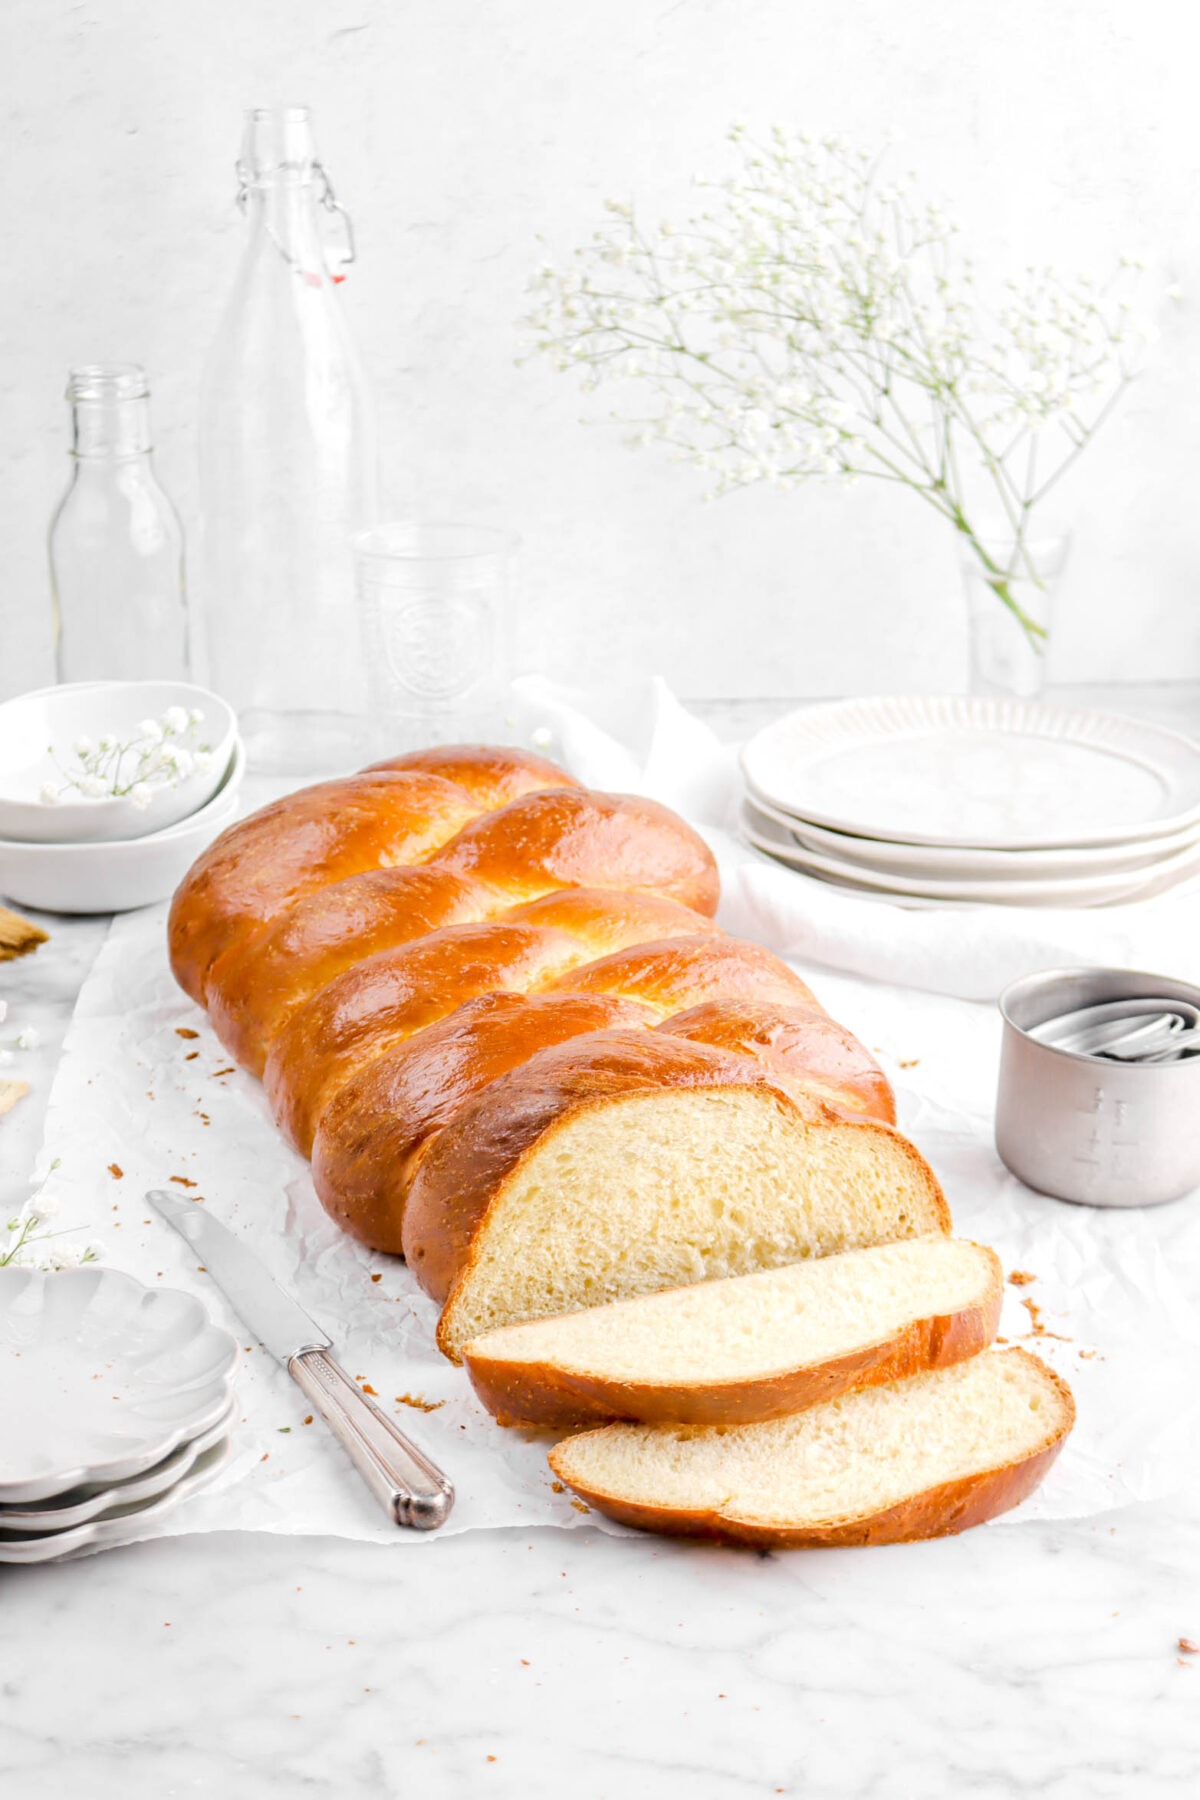 challah with two slices laying in front, flowers, plates, bowls, and empty glasses behind